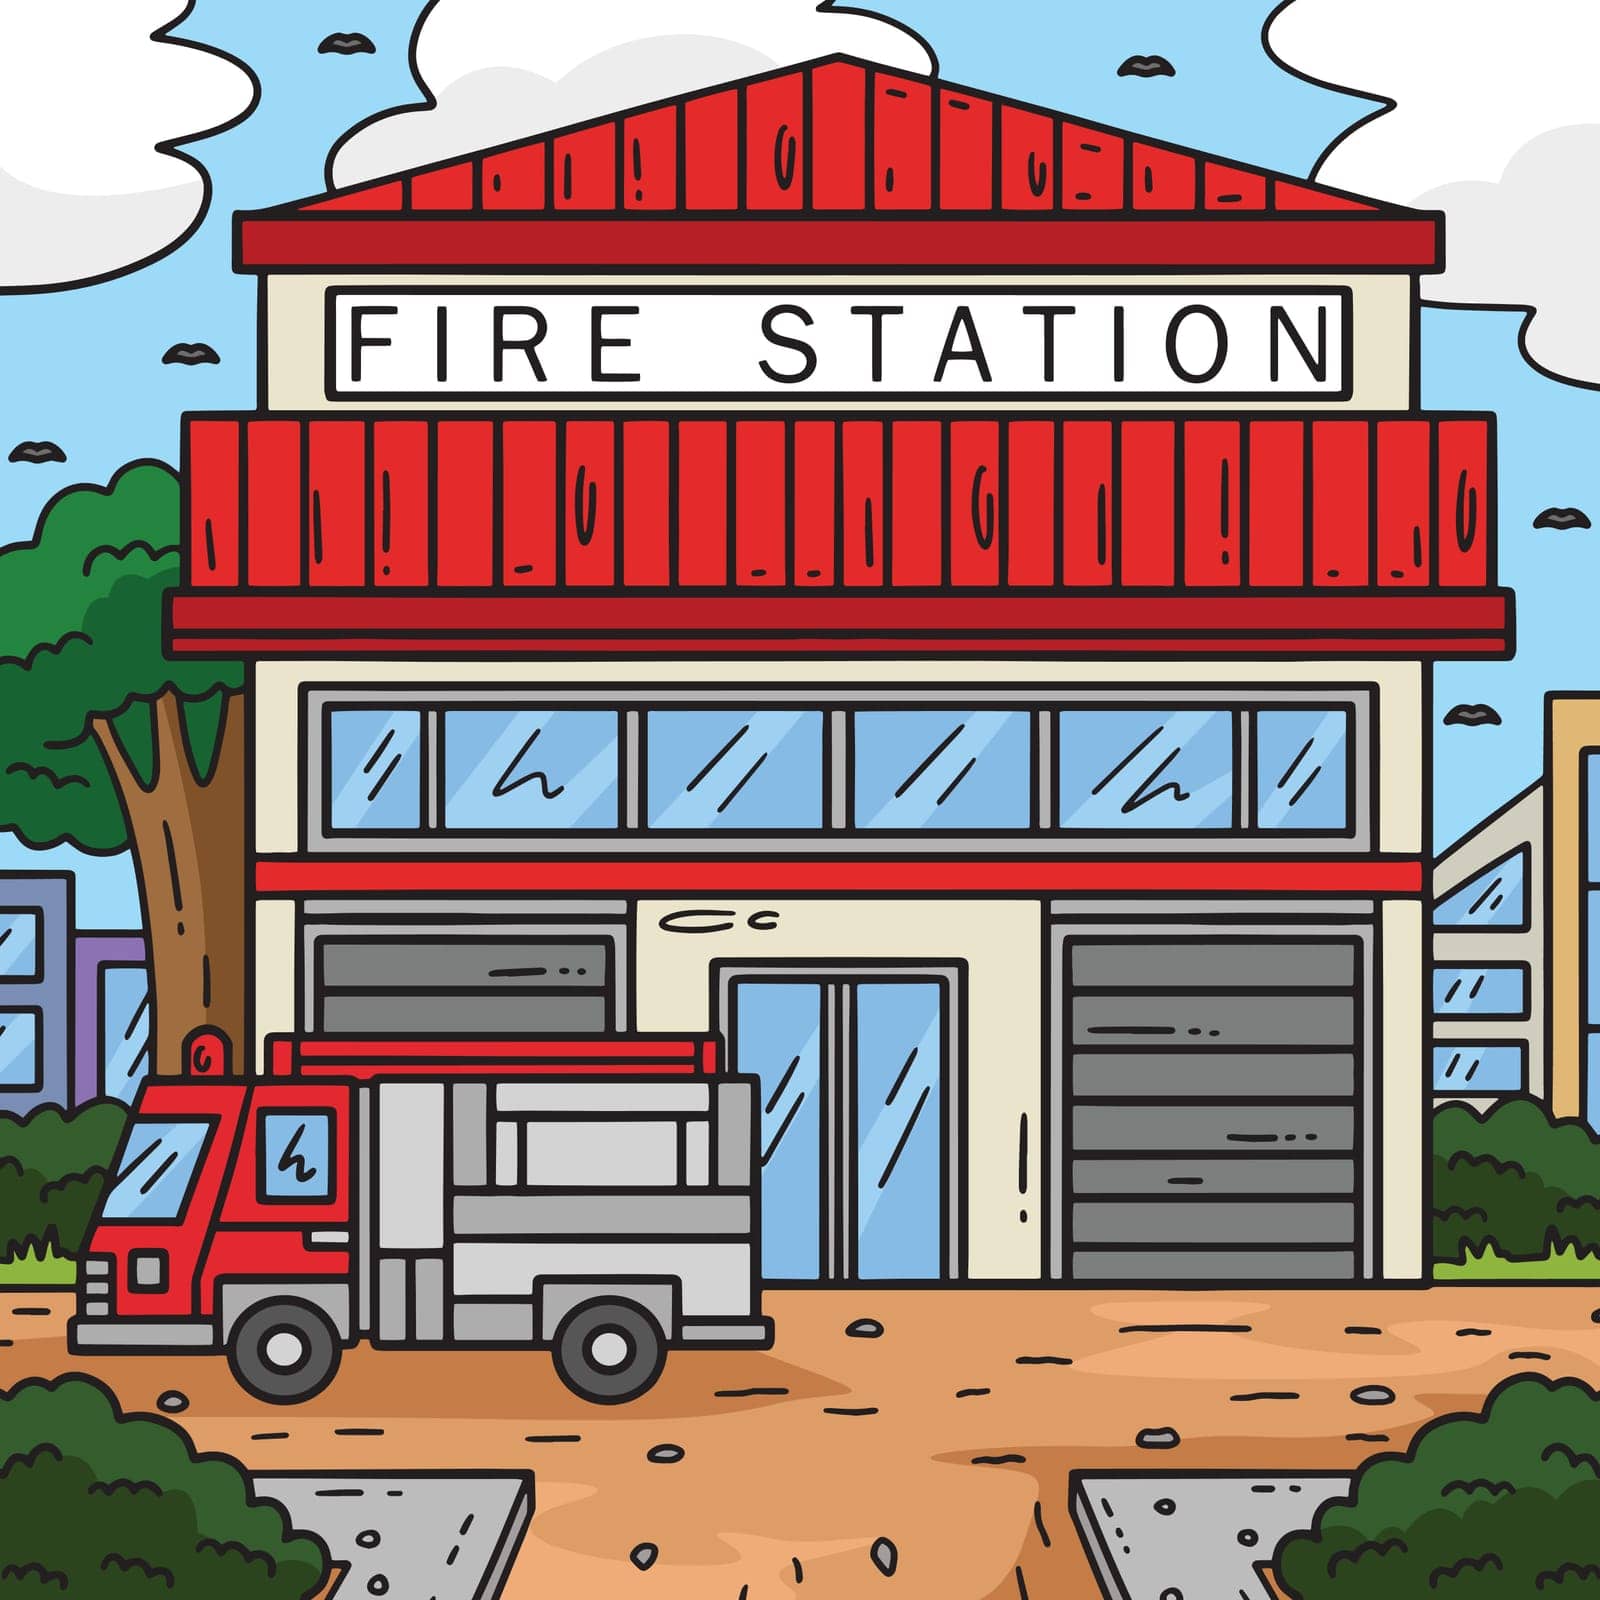 Firefighter Station Colored Cartoon Illustration by abbydesign